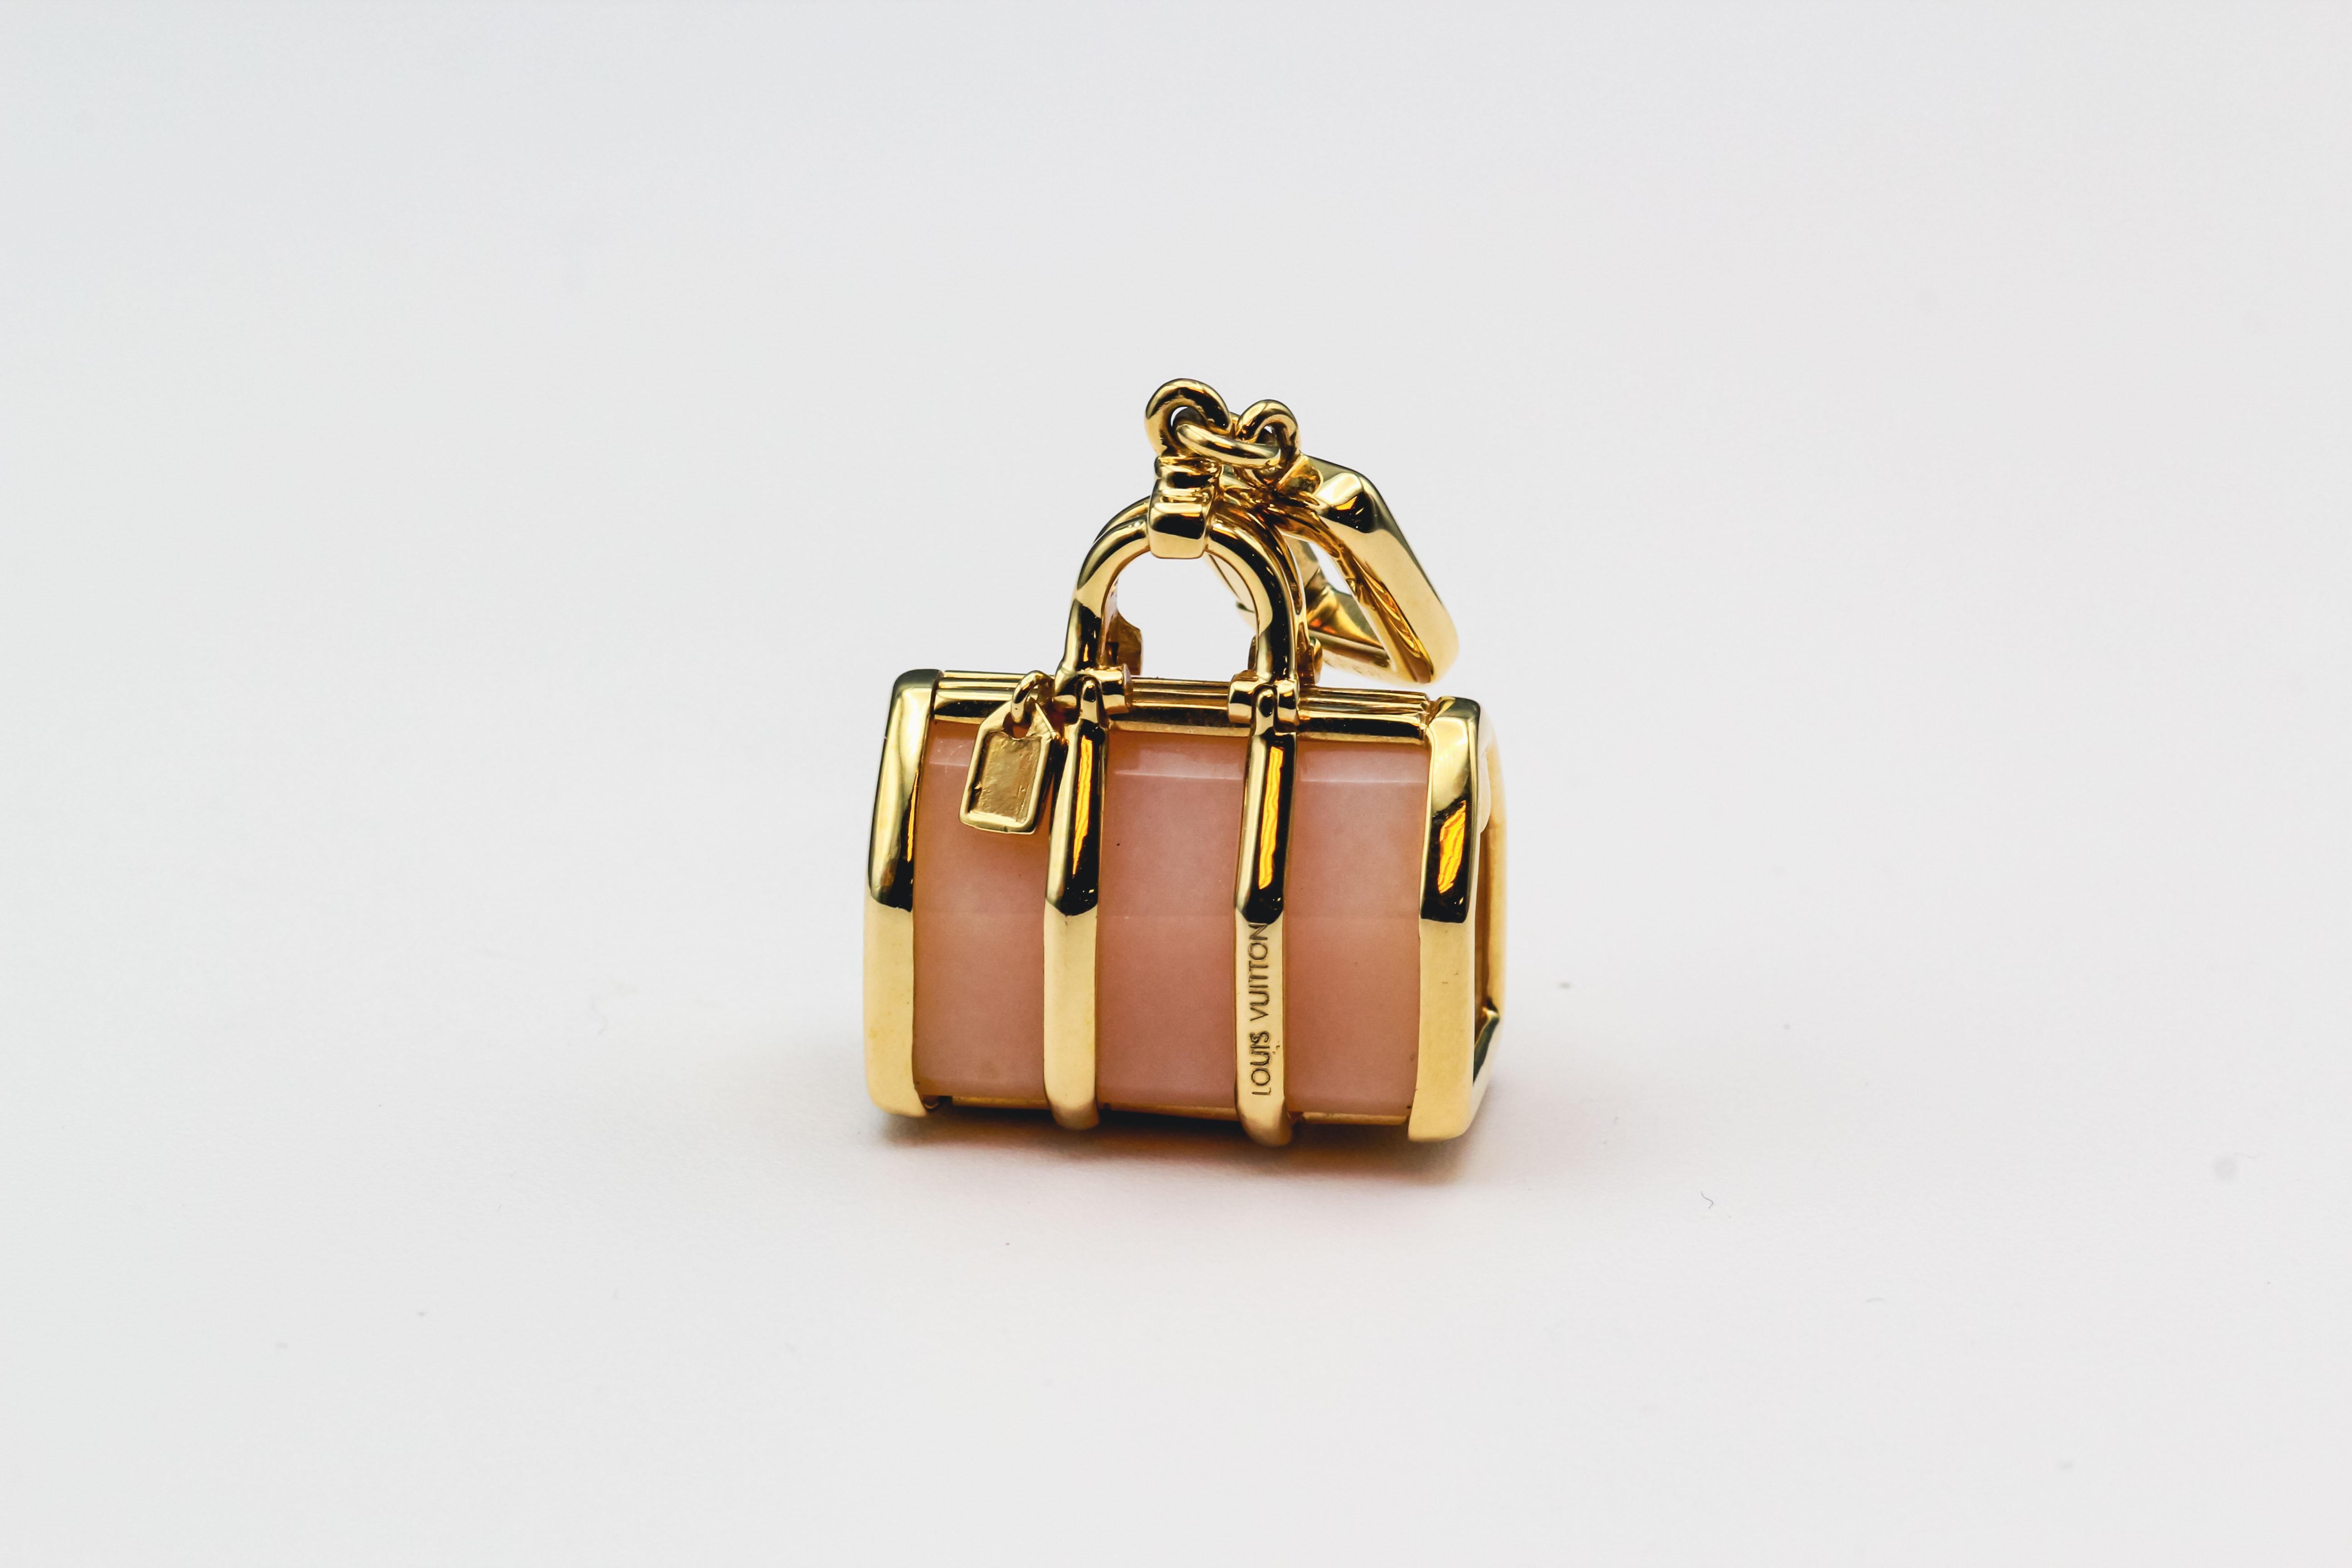 Elevate your style with the Contemporary Louis Vuitton 18k Yellow Gold Rose Quartz Keepall Bag Charm Pendant. This exquisite piece seamlessly combines modern luxury with the timeless elegance of Louis Vuitton, showcasing the brand's dedication to